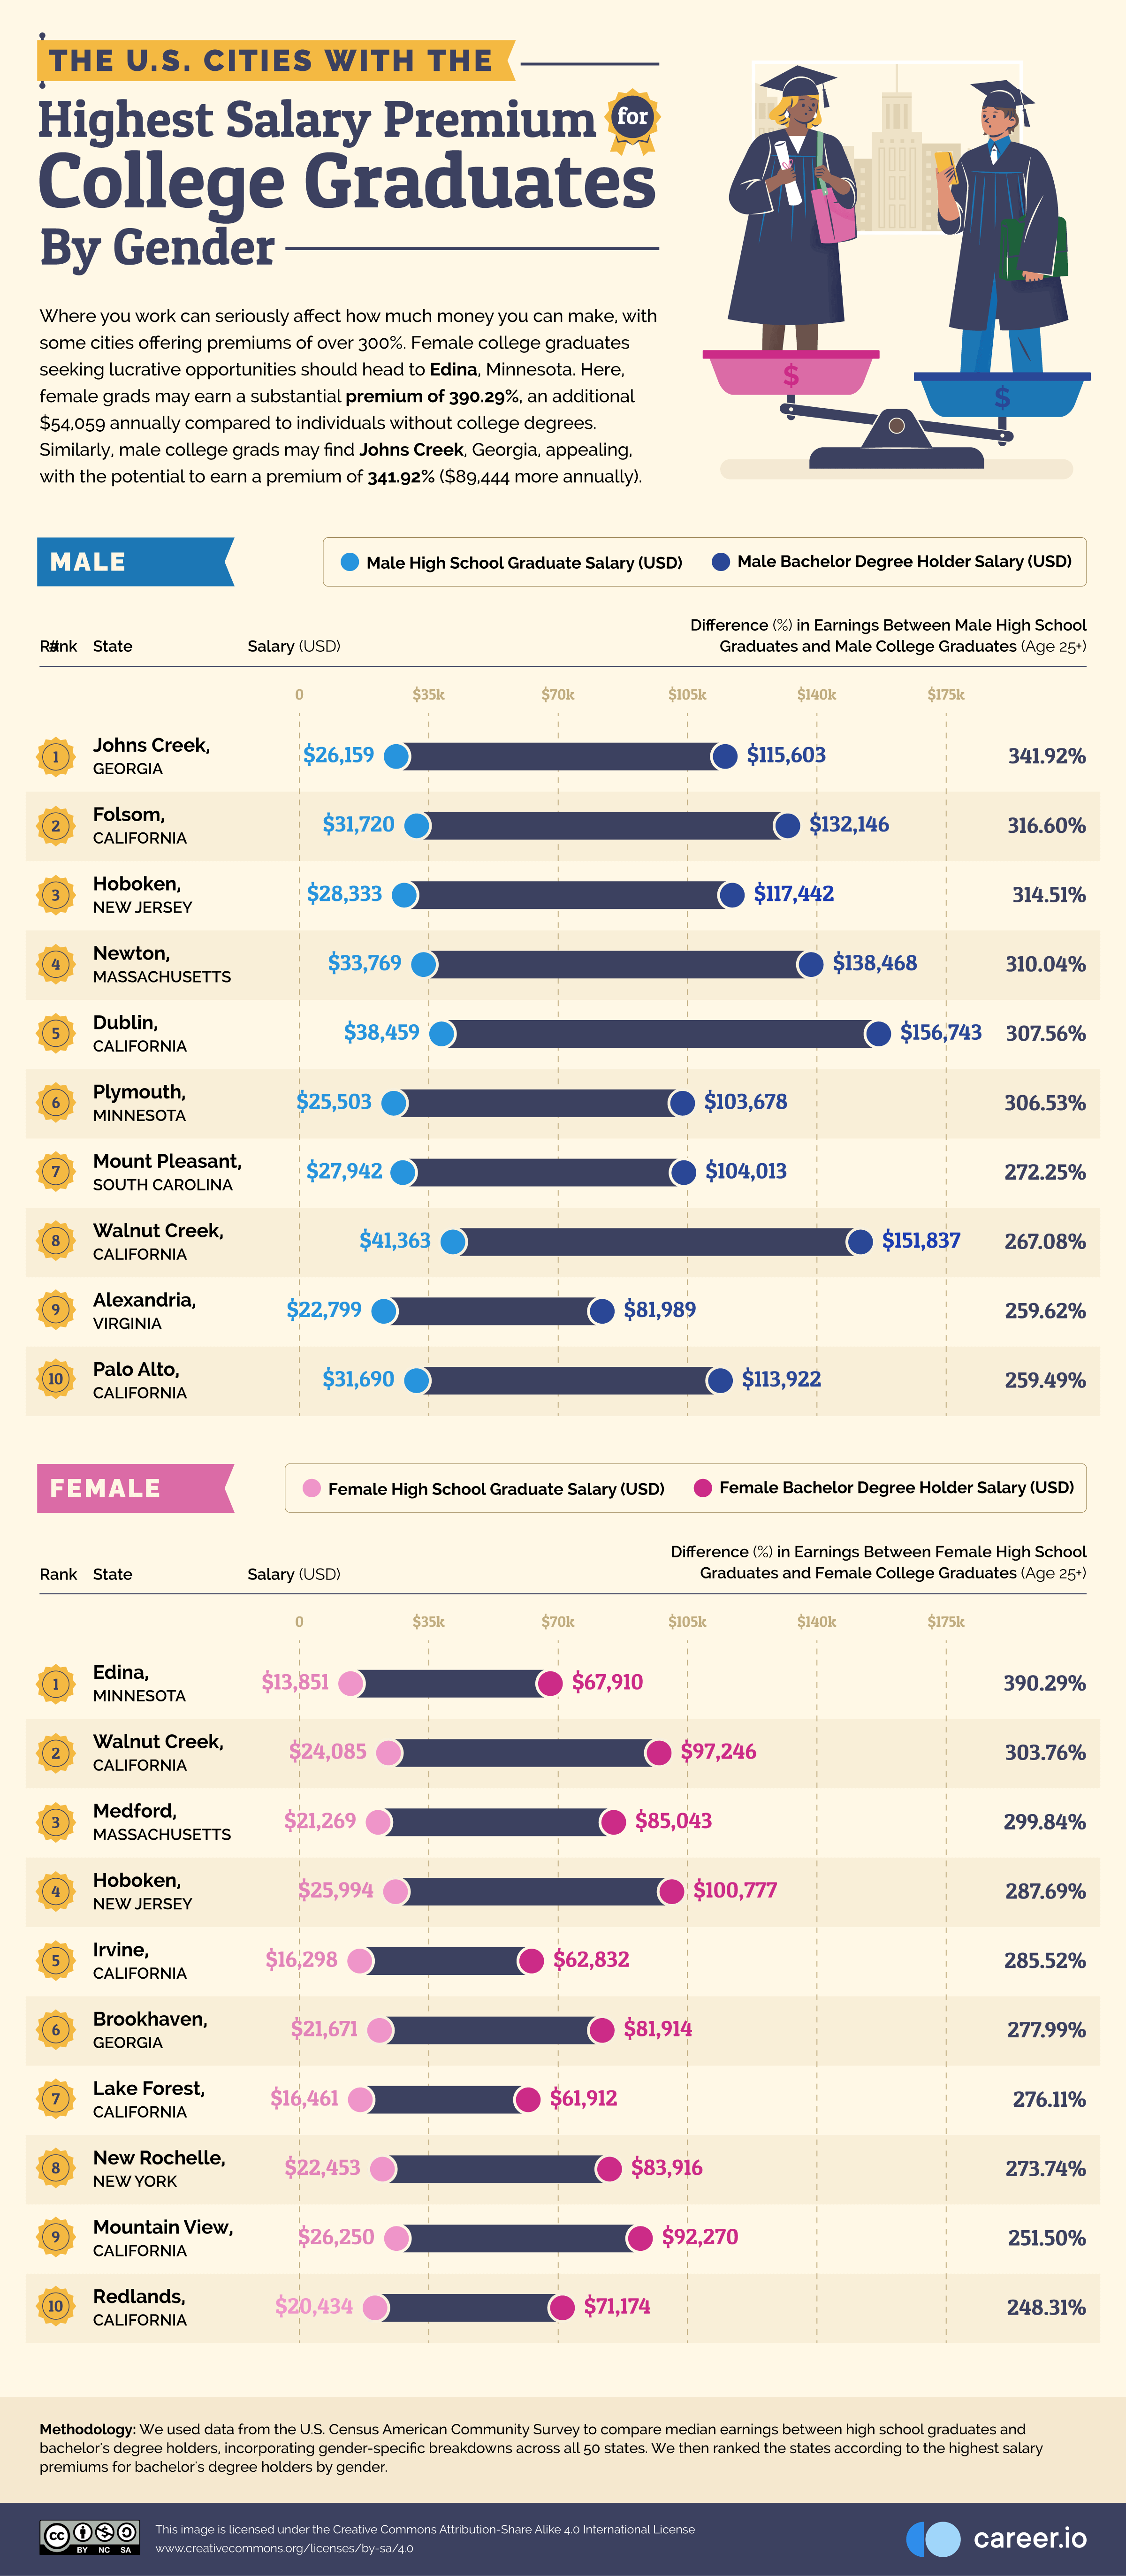 06 The-US-Cities-With-the-Highest-Salary-Premium-for-College-Graduates-by-Gender